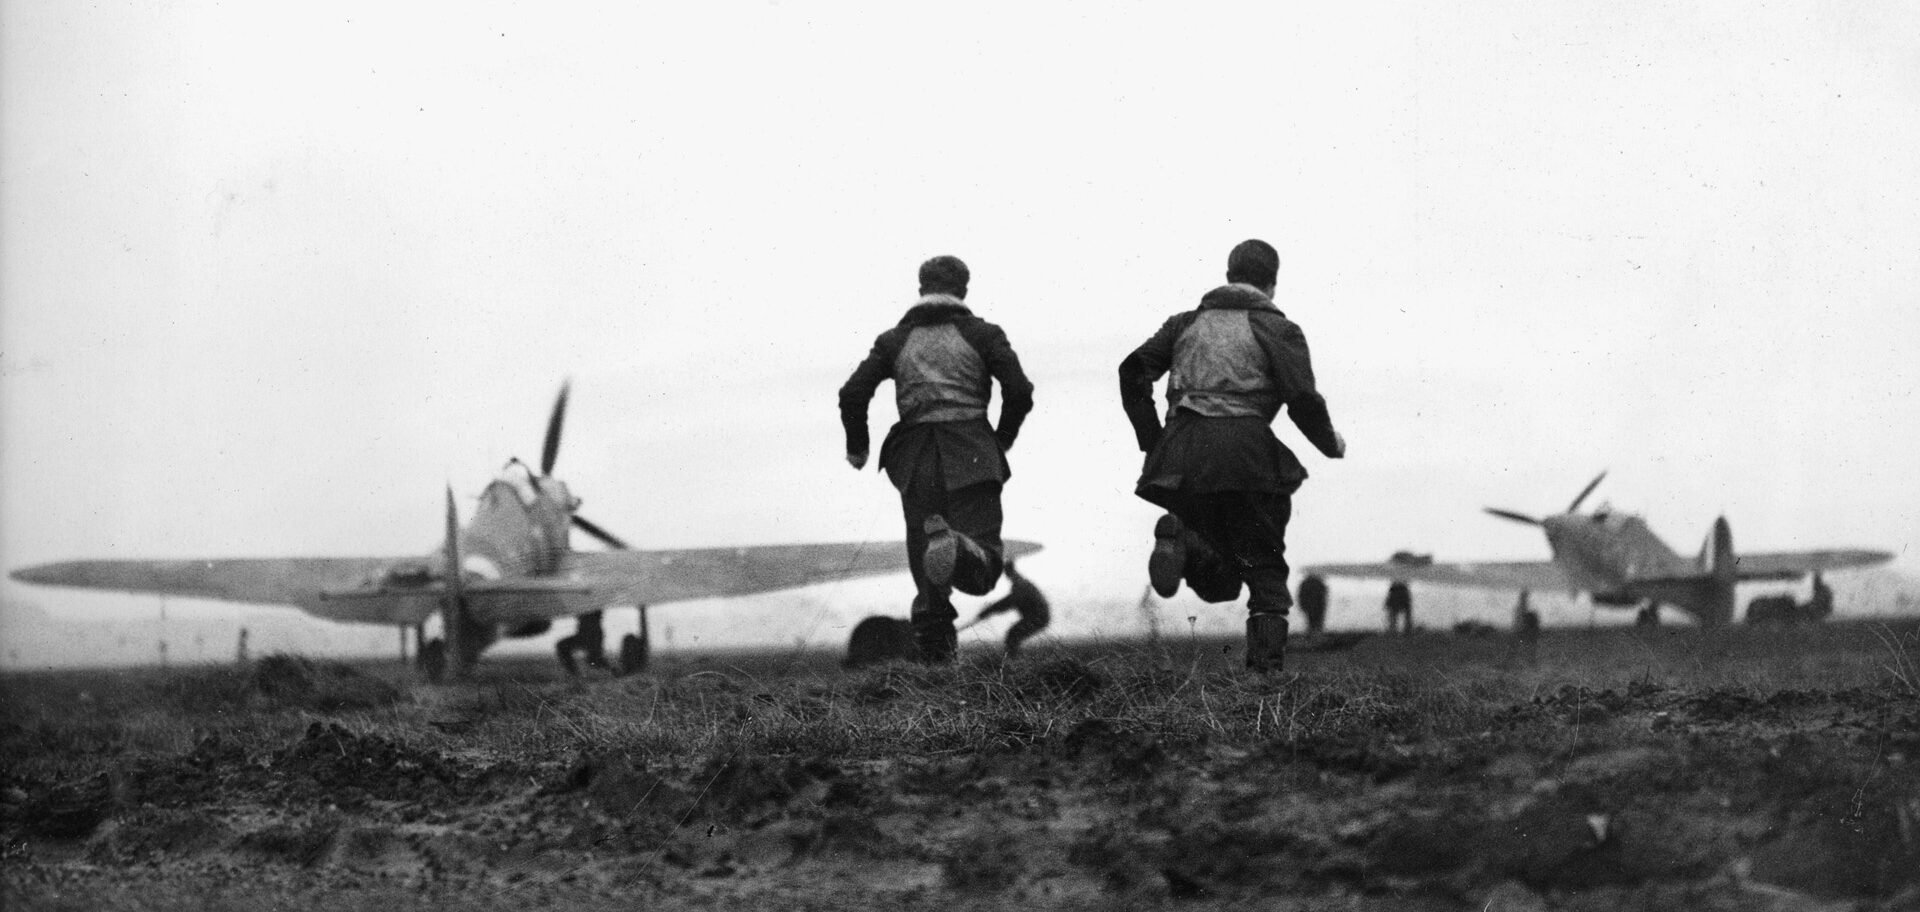 “Ring the bell and run like hell.” Two pilots sprint to their awaiting Hurricanes as ground crew members prepare their planes for flight—and another fight with the German “bandits.”